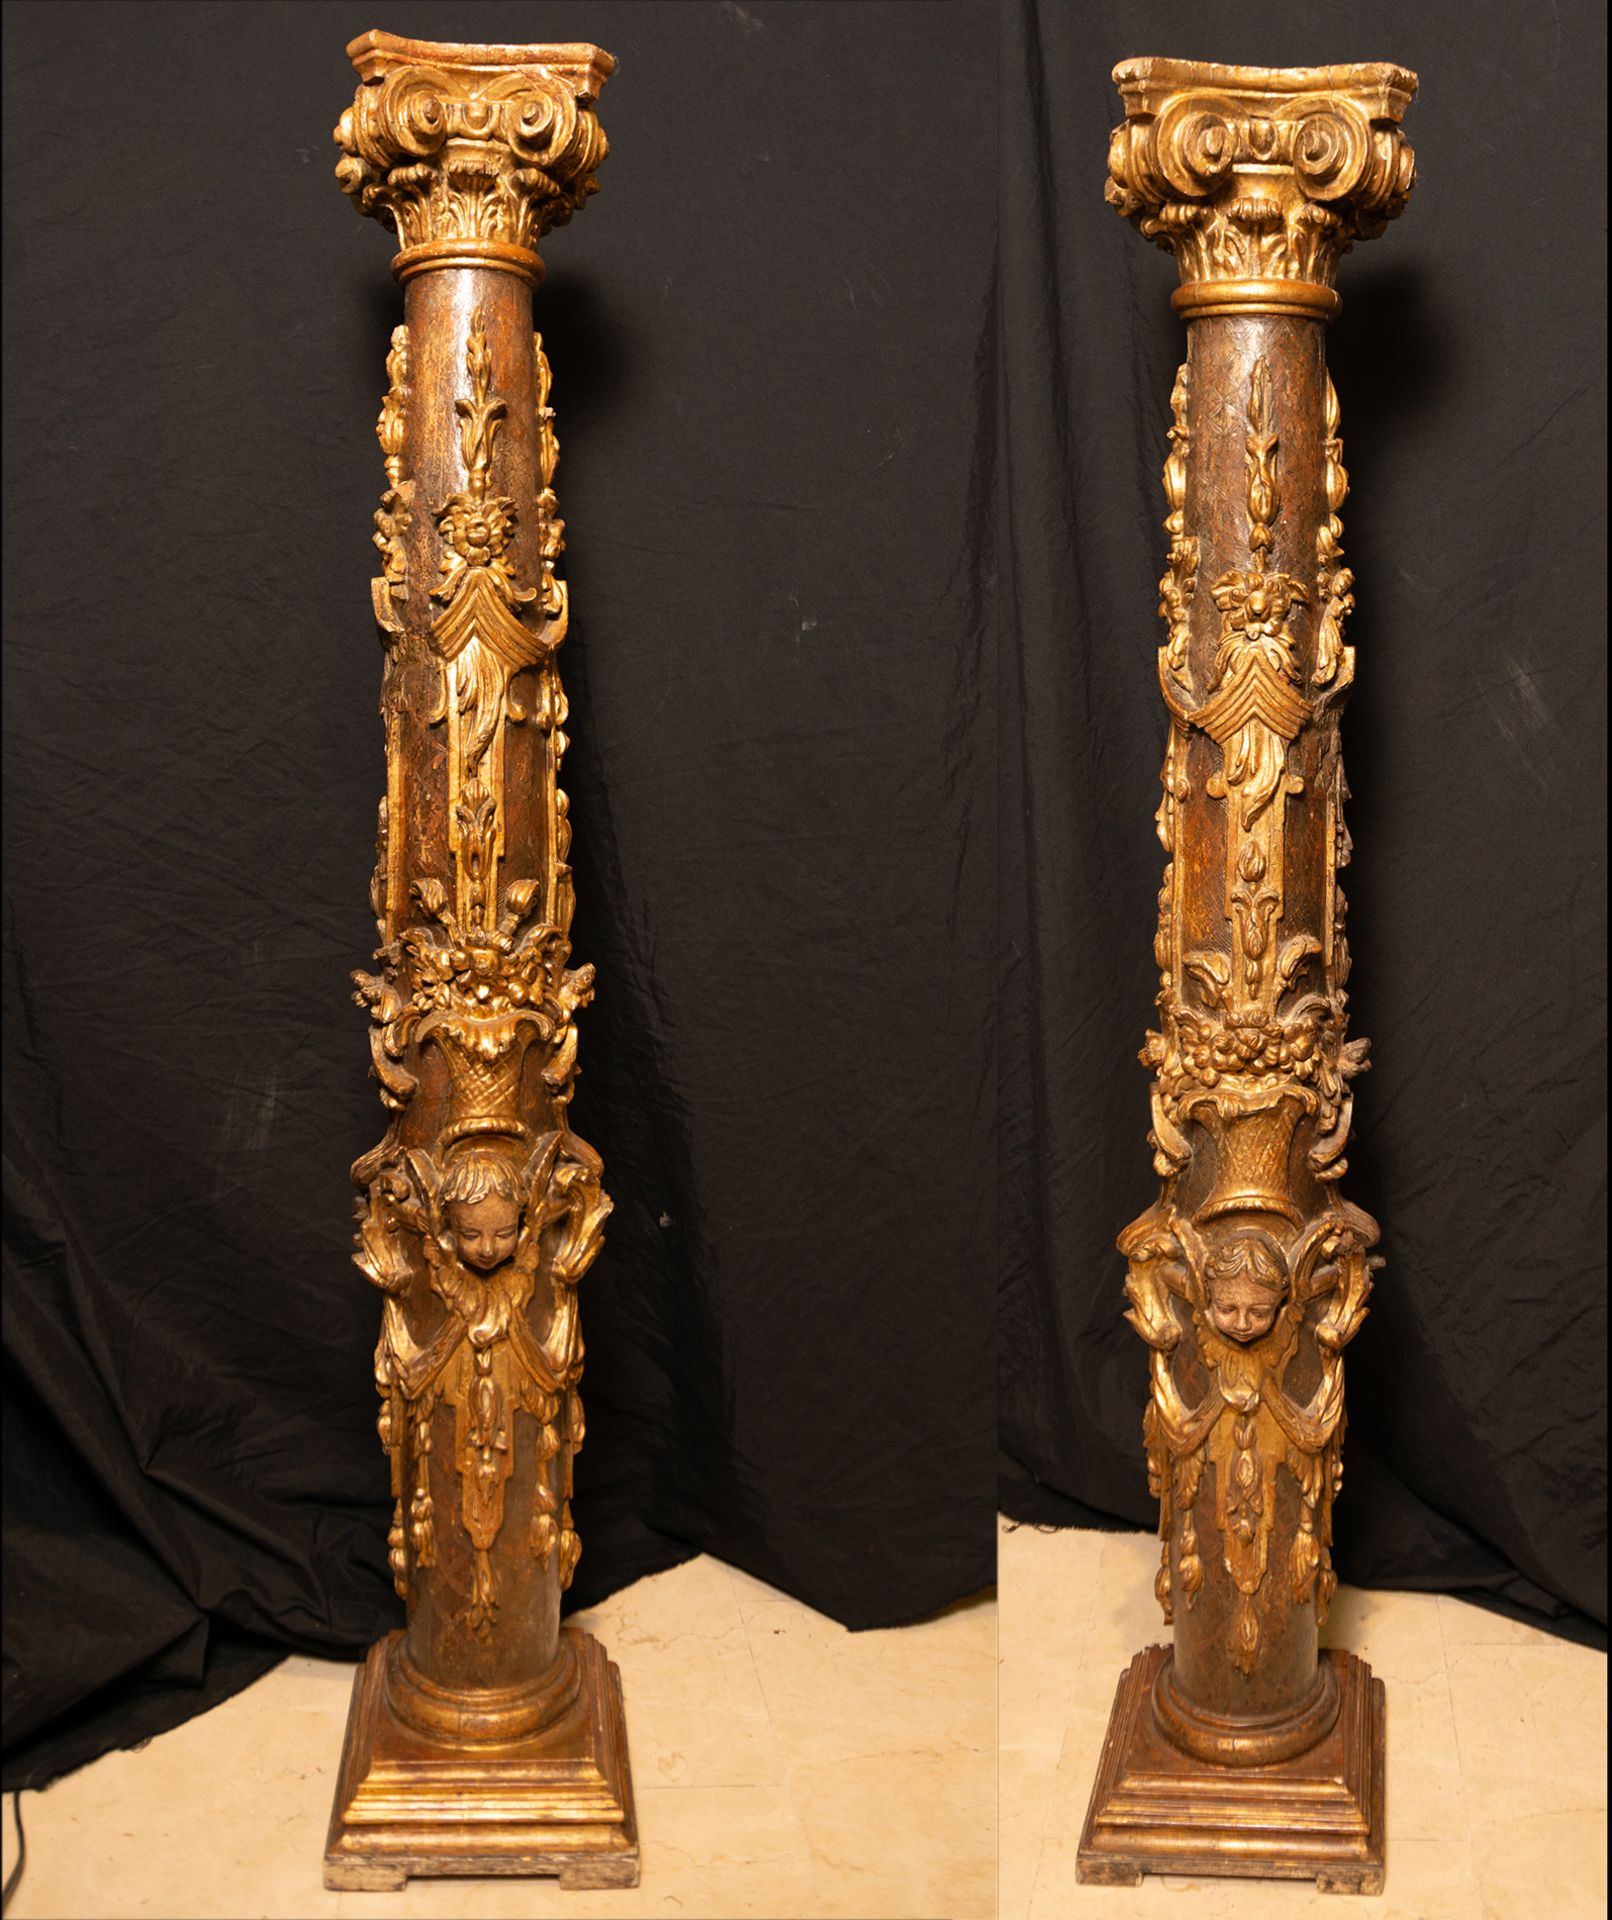 Important pair of Baroque Columns in gilded wood, Sevillian school of the 17th century